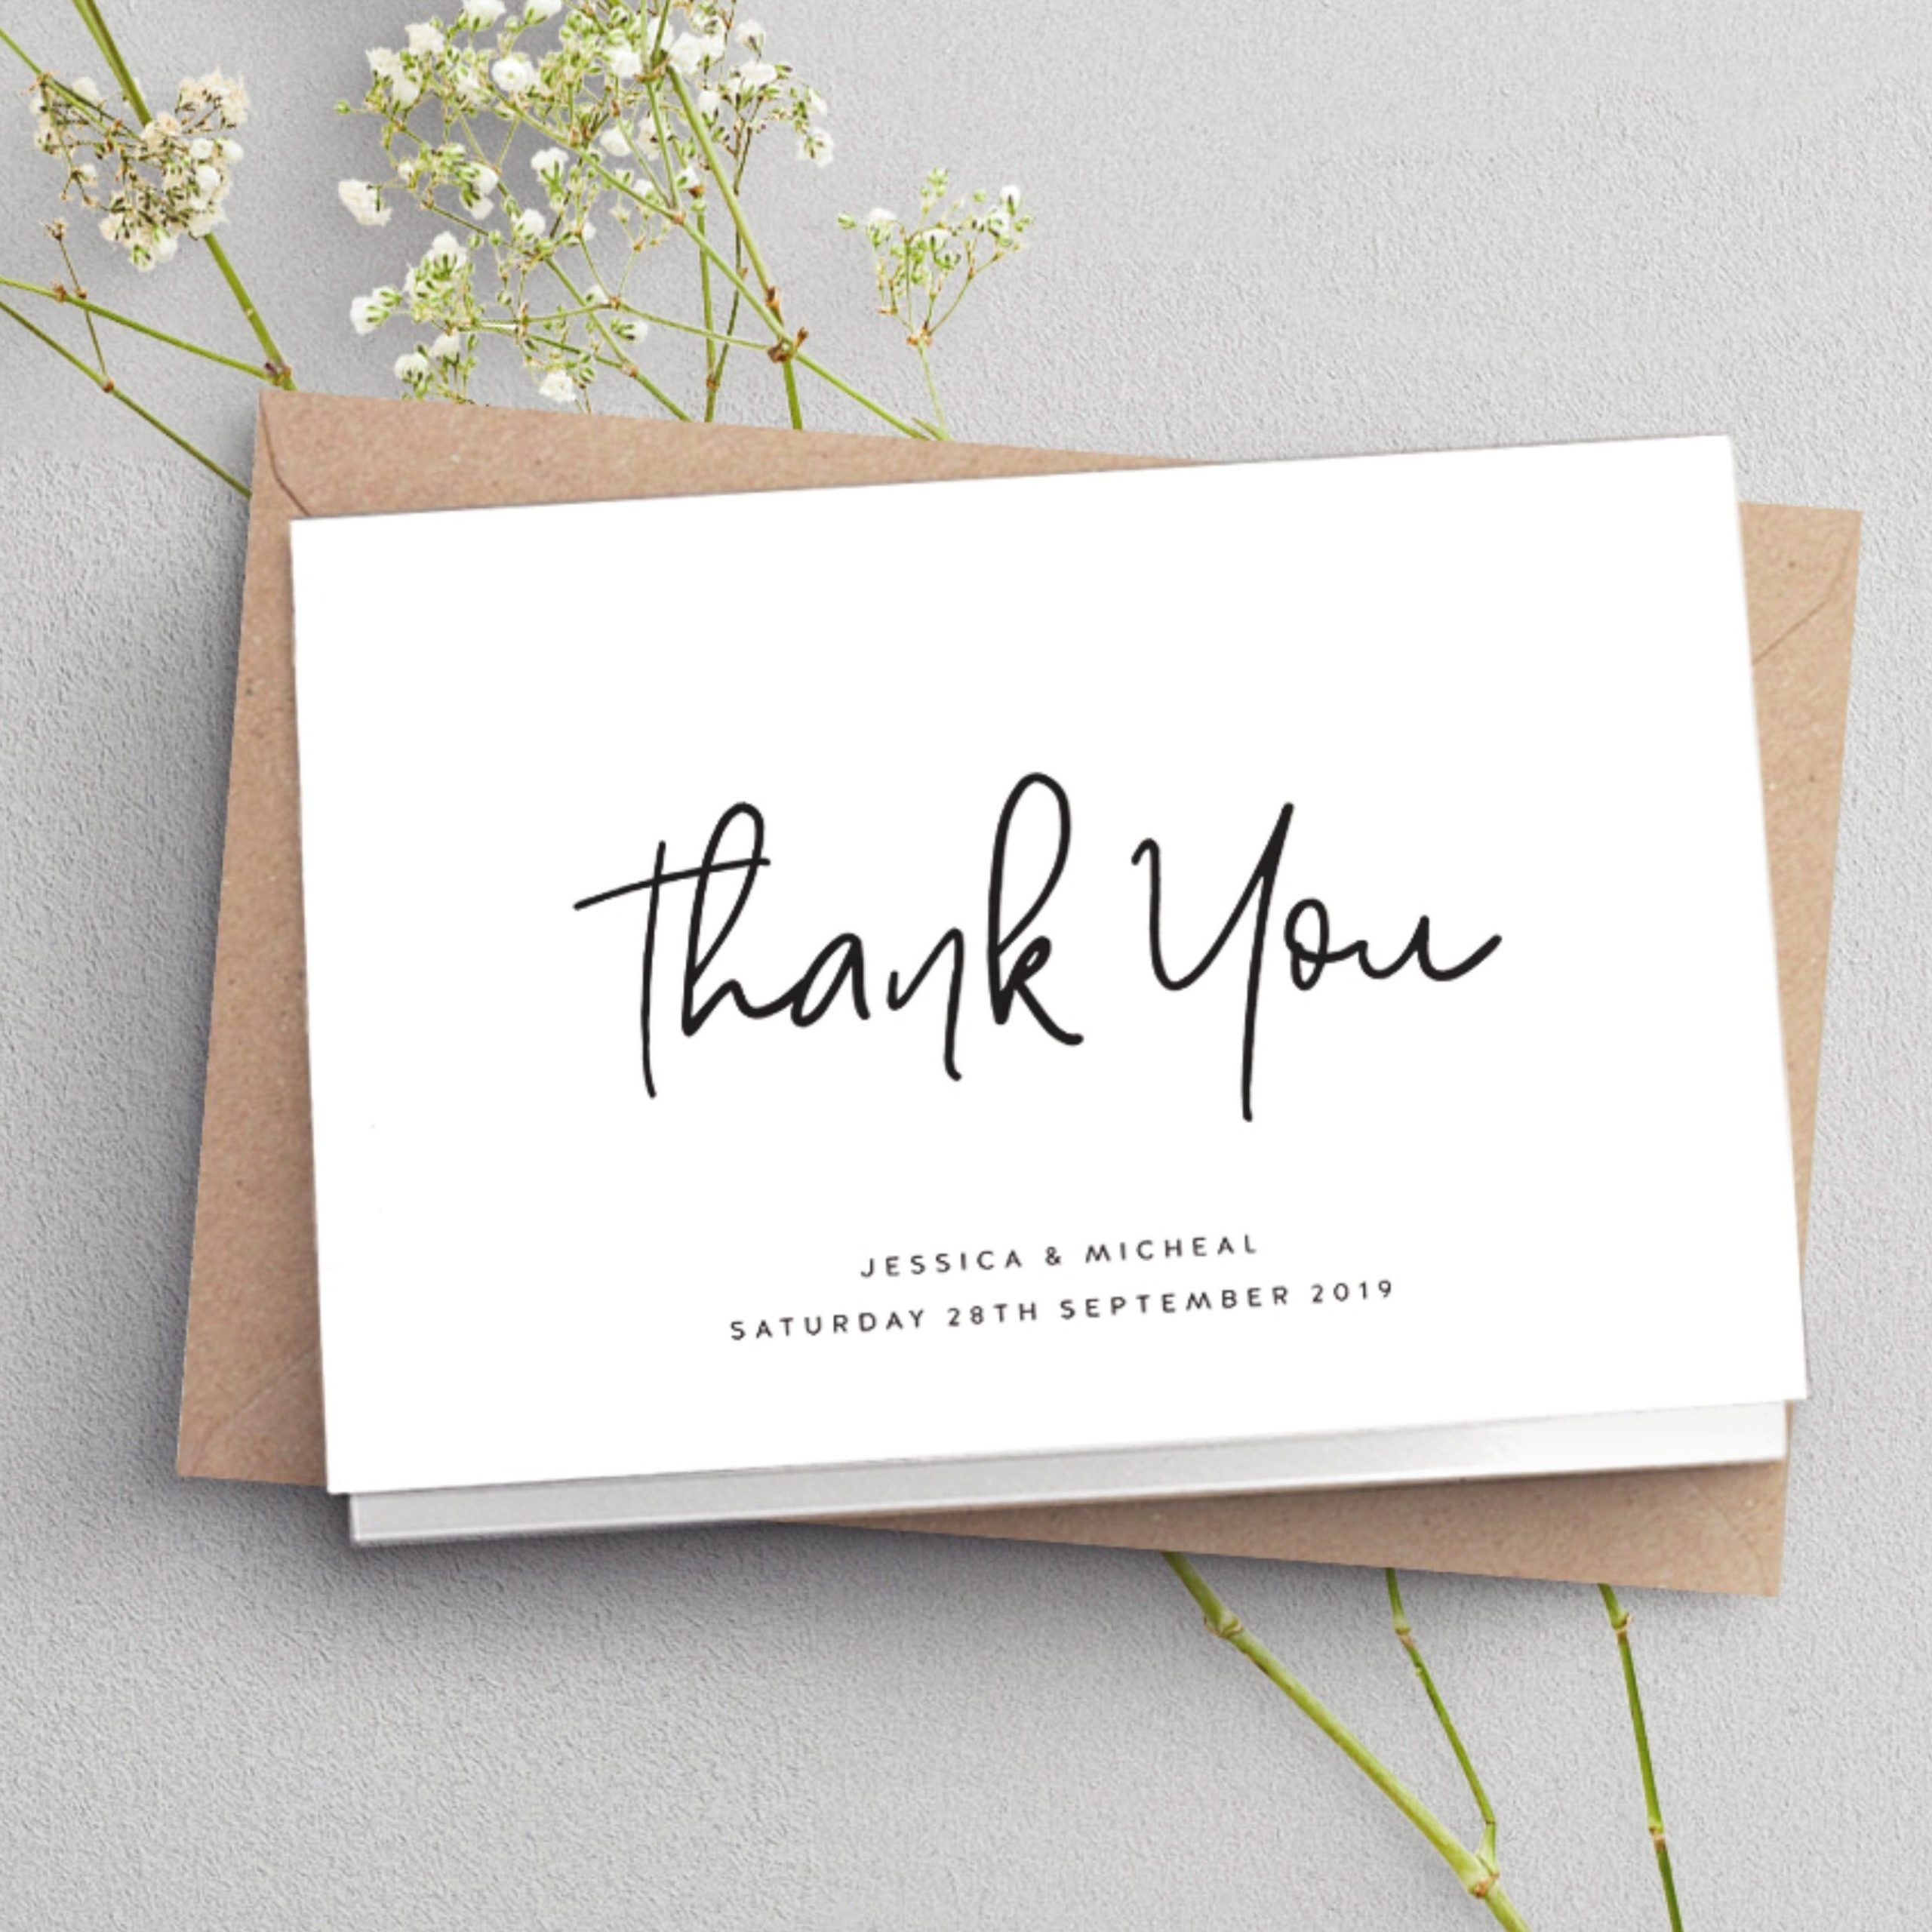 thank you cards with business card slots 3